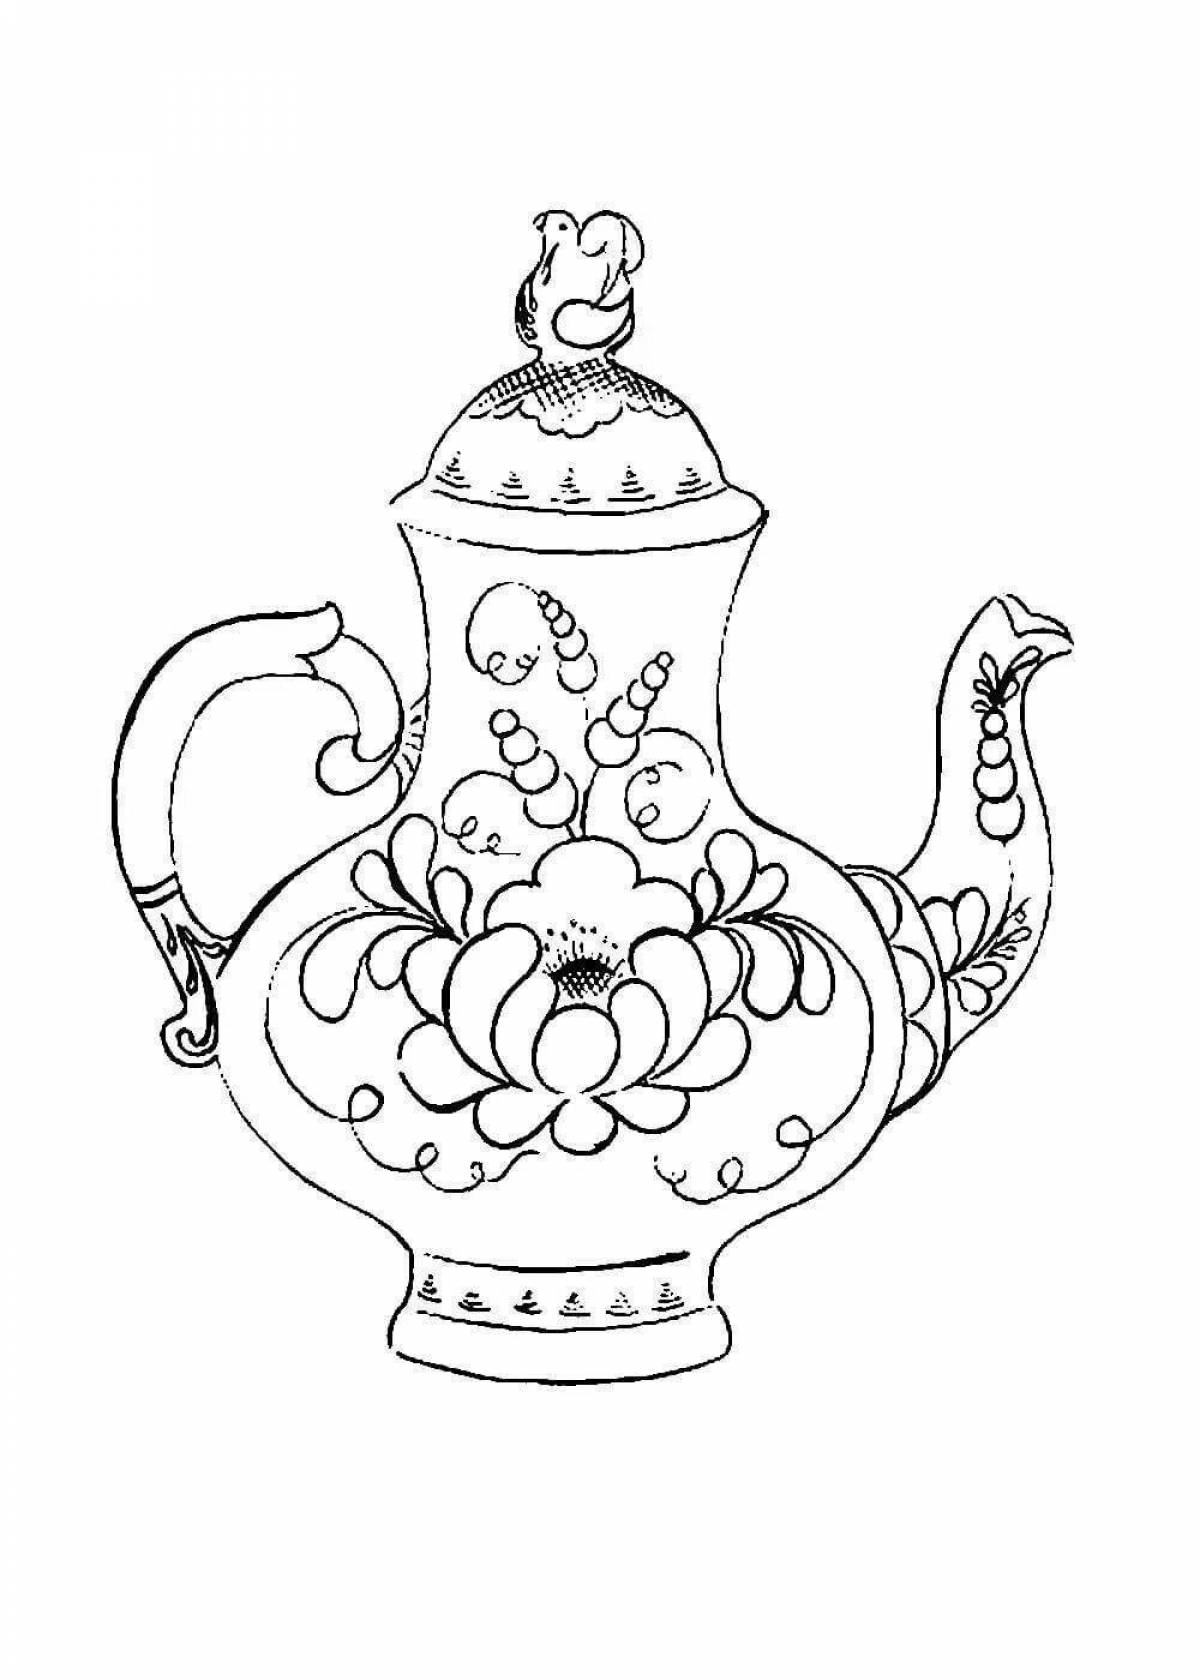 Gzhel kettle coloring page